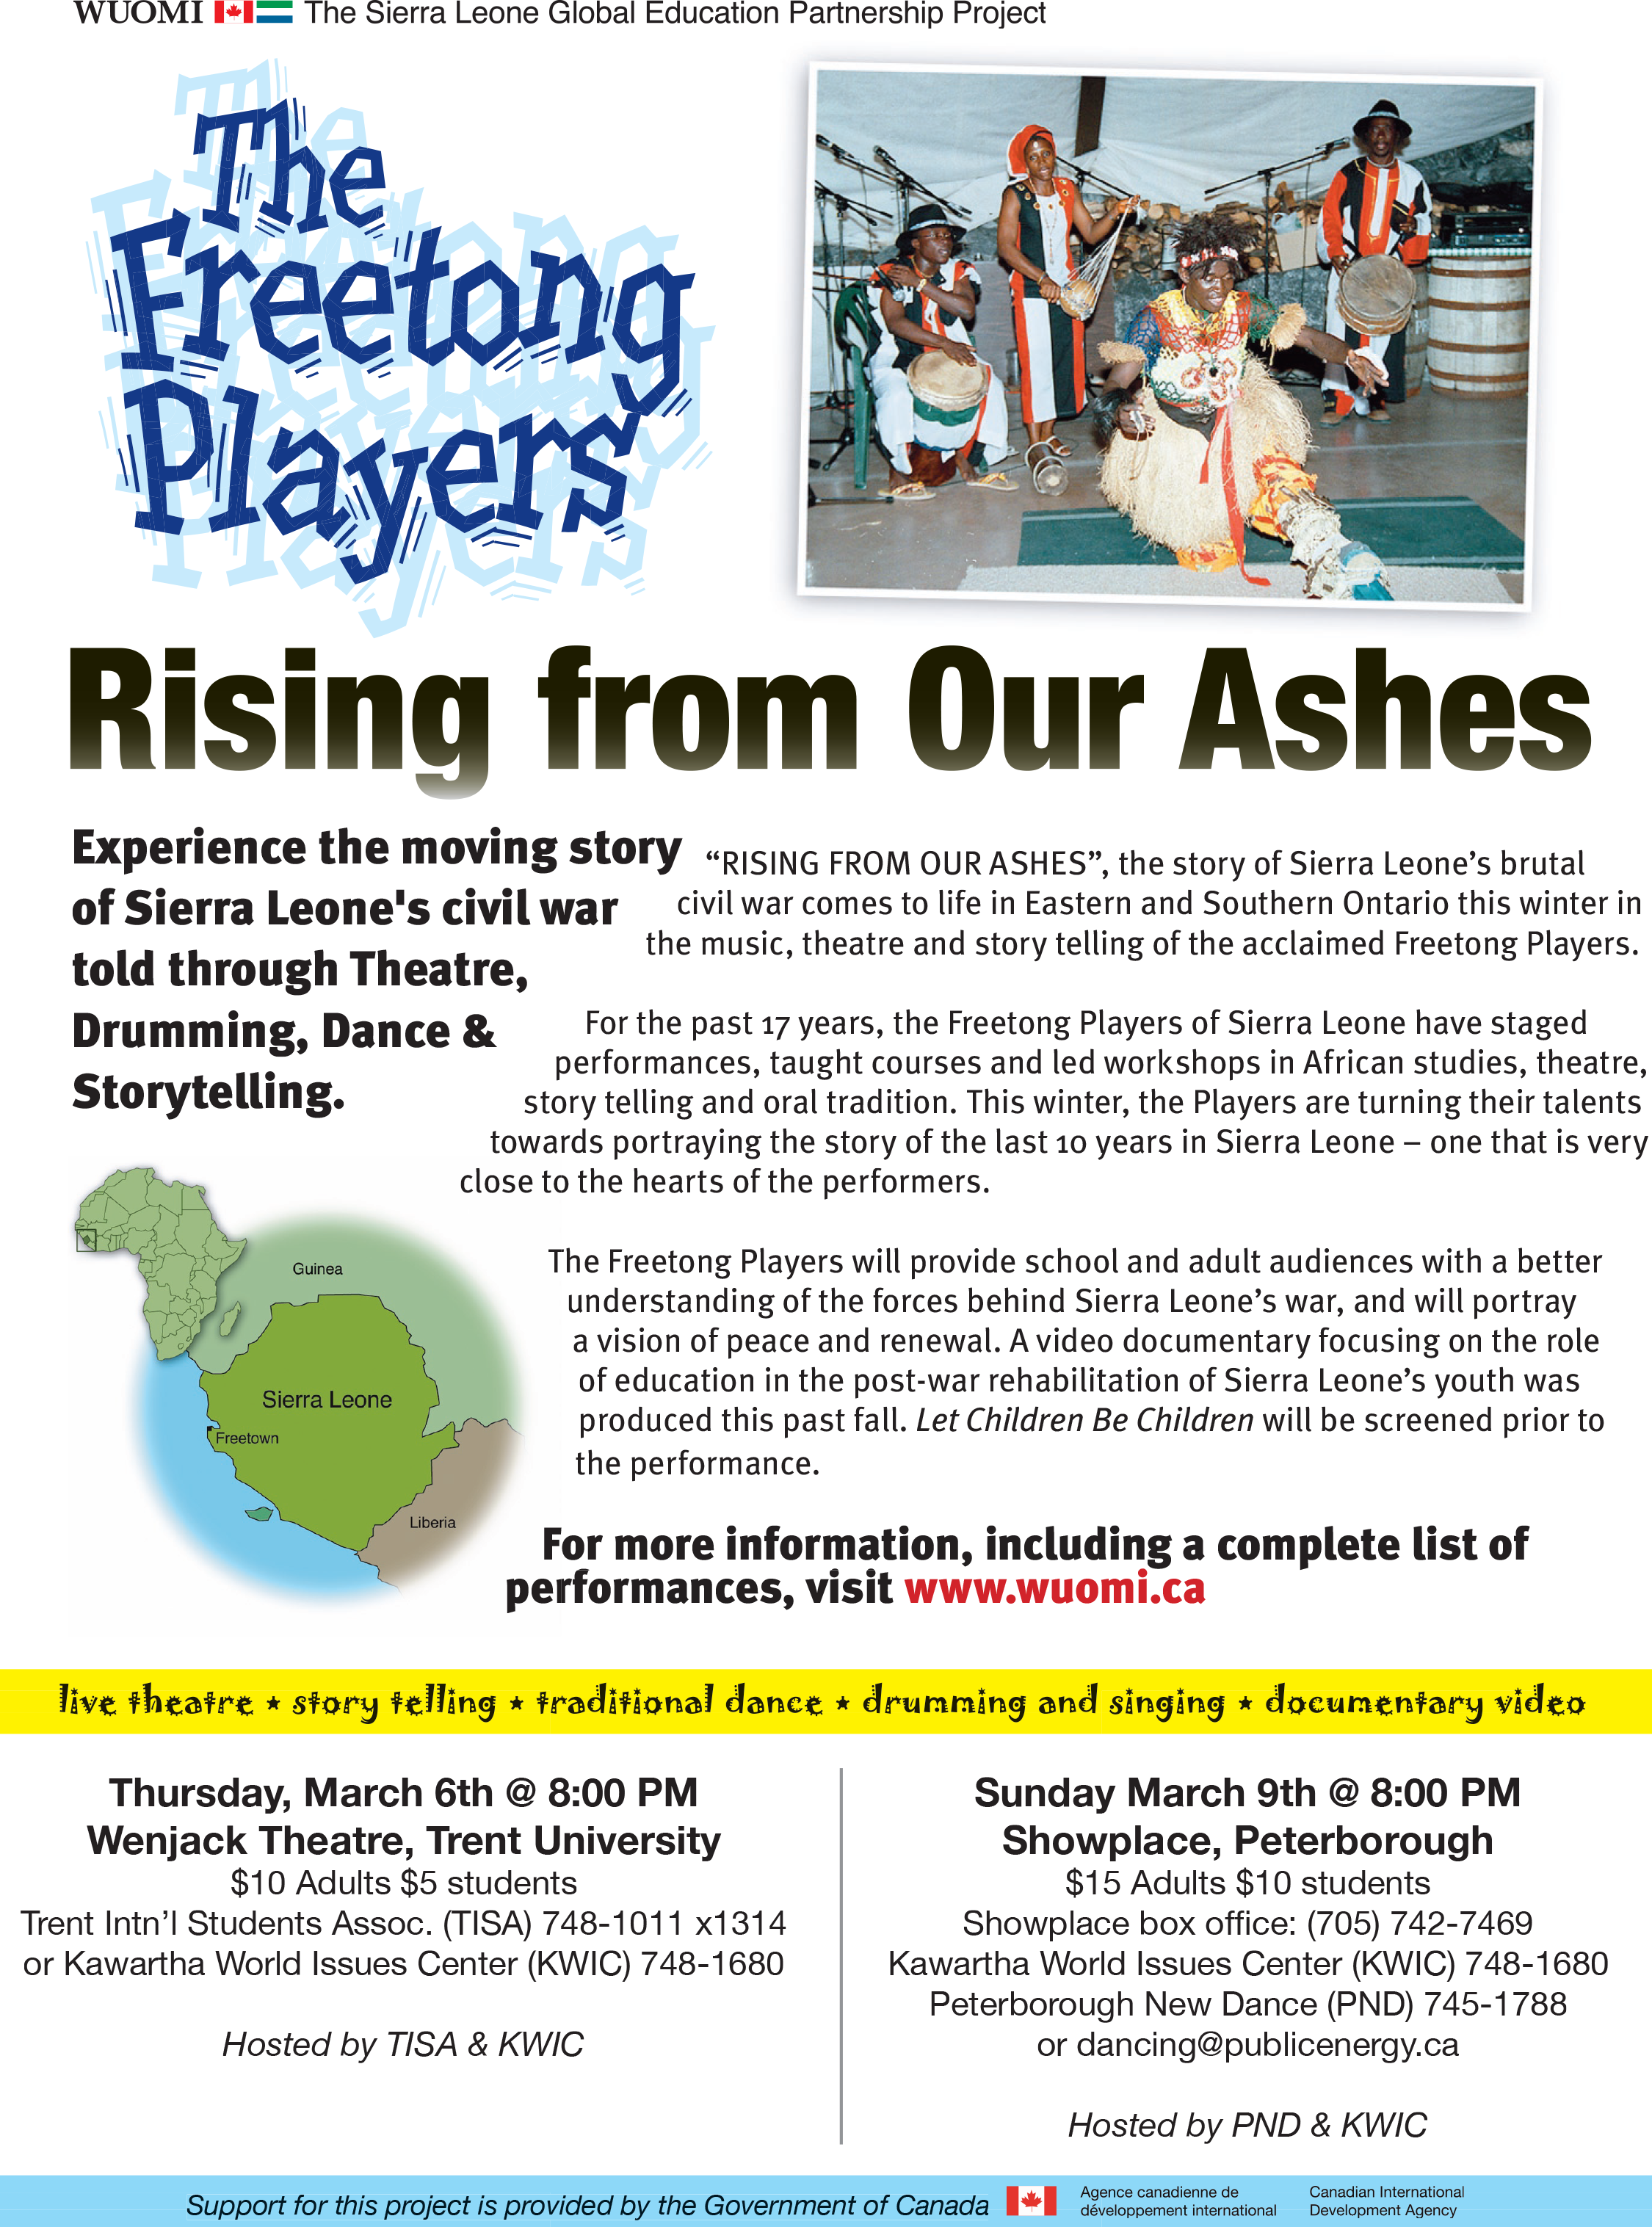 Freetong Players: Rising from Our Ashes with Kawartha World Issues Centre & Wuomi Poster for The Freetong Players in the photo.